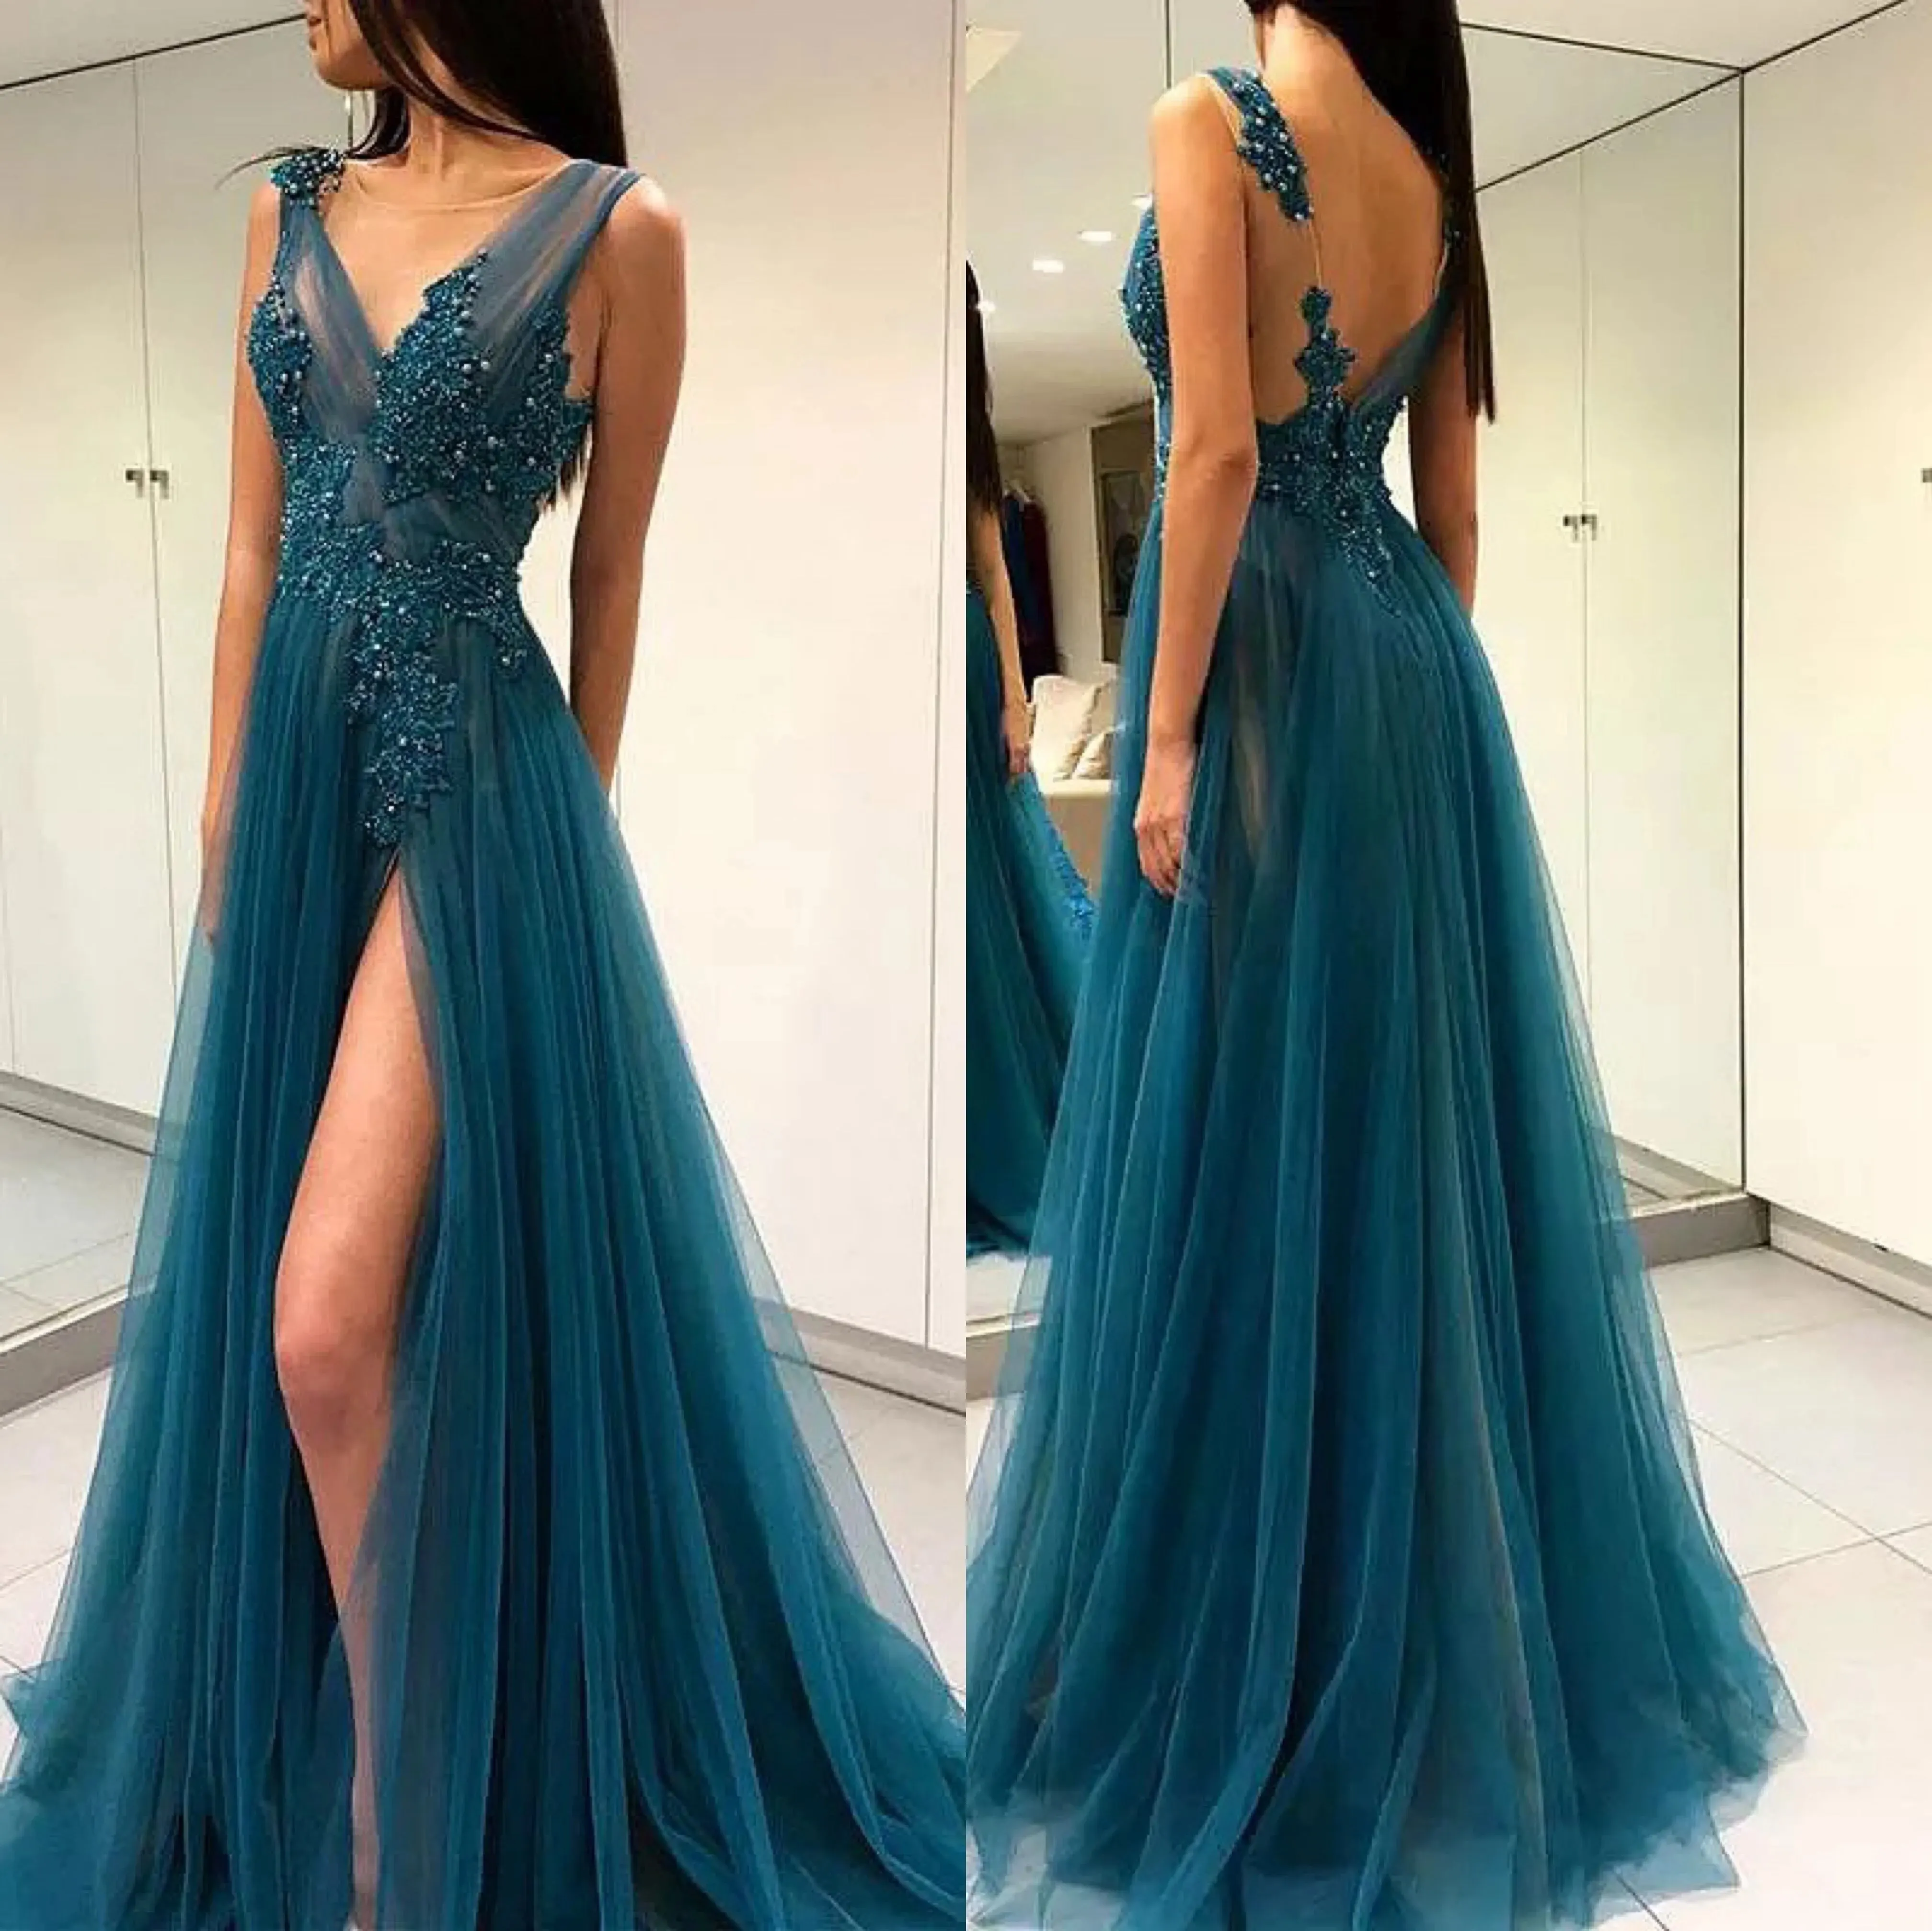 

Tulle Double V-neck Prom Dresses A-line Backless High Slit Sleeveless Graduation Dress Appliques Sequins Long Evening Gowns